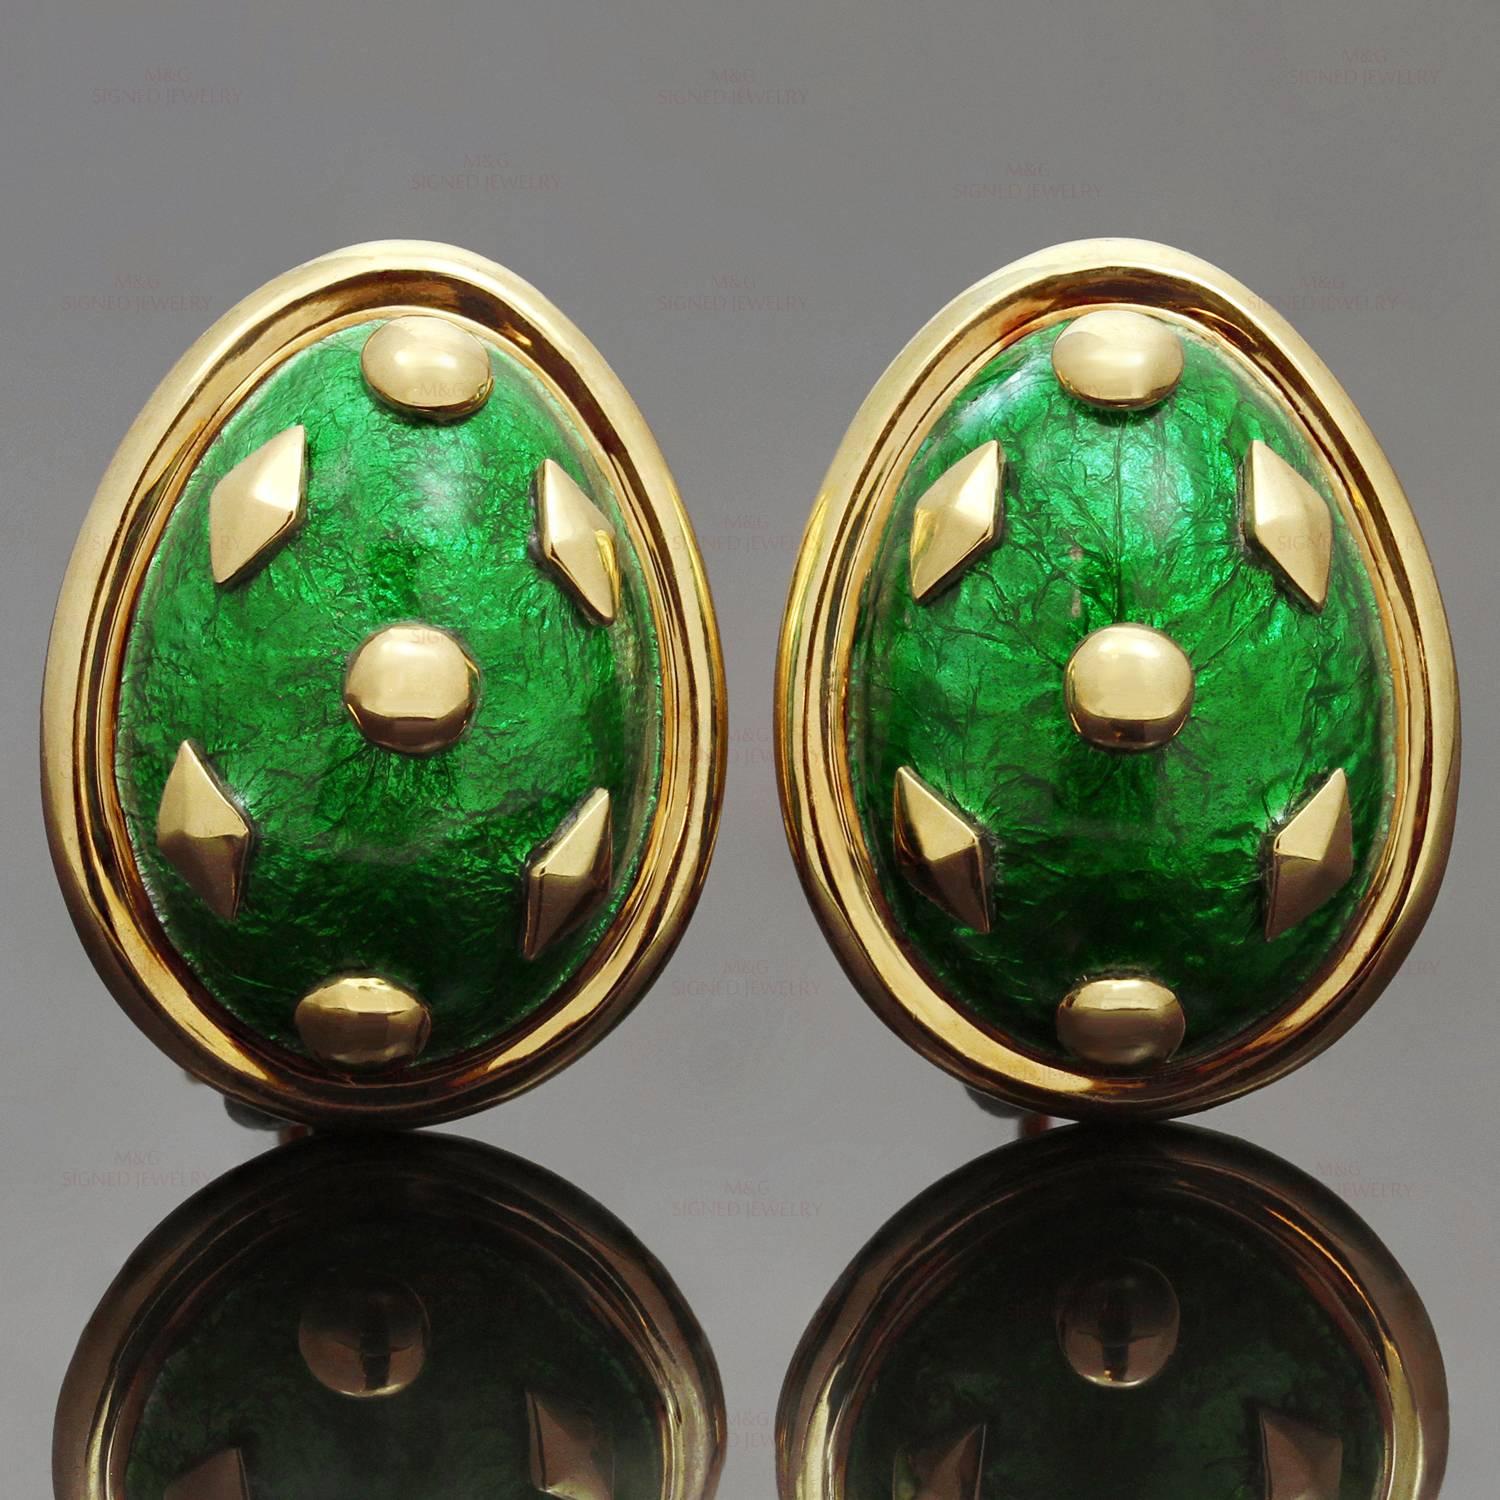 These iconic Tiffany earrings were designed by Schlumberger for the dazzling Dot Losange collection. These clip-on earrings  are crafted in 18k yellow gold and beautifully inlaid with green enamel. Made in United States circa 2000s. Measurements: